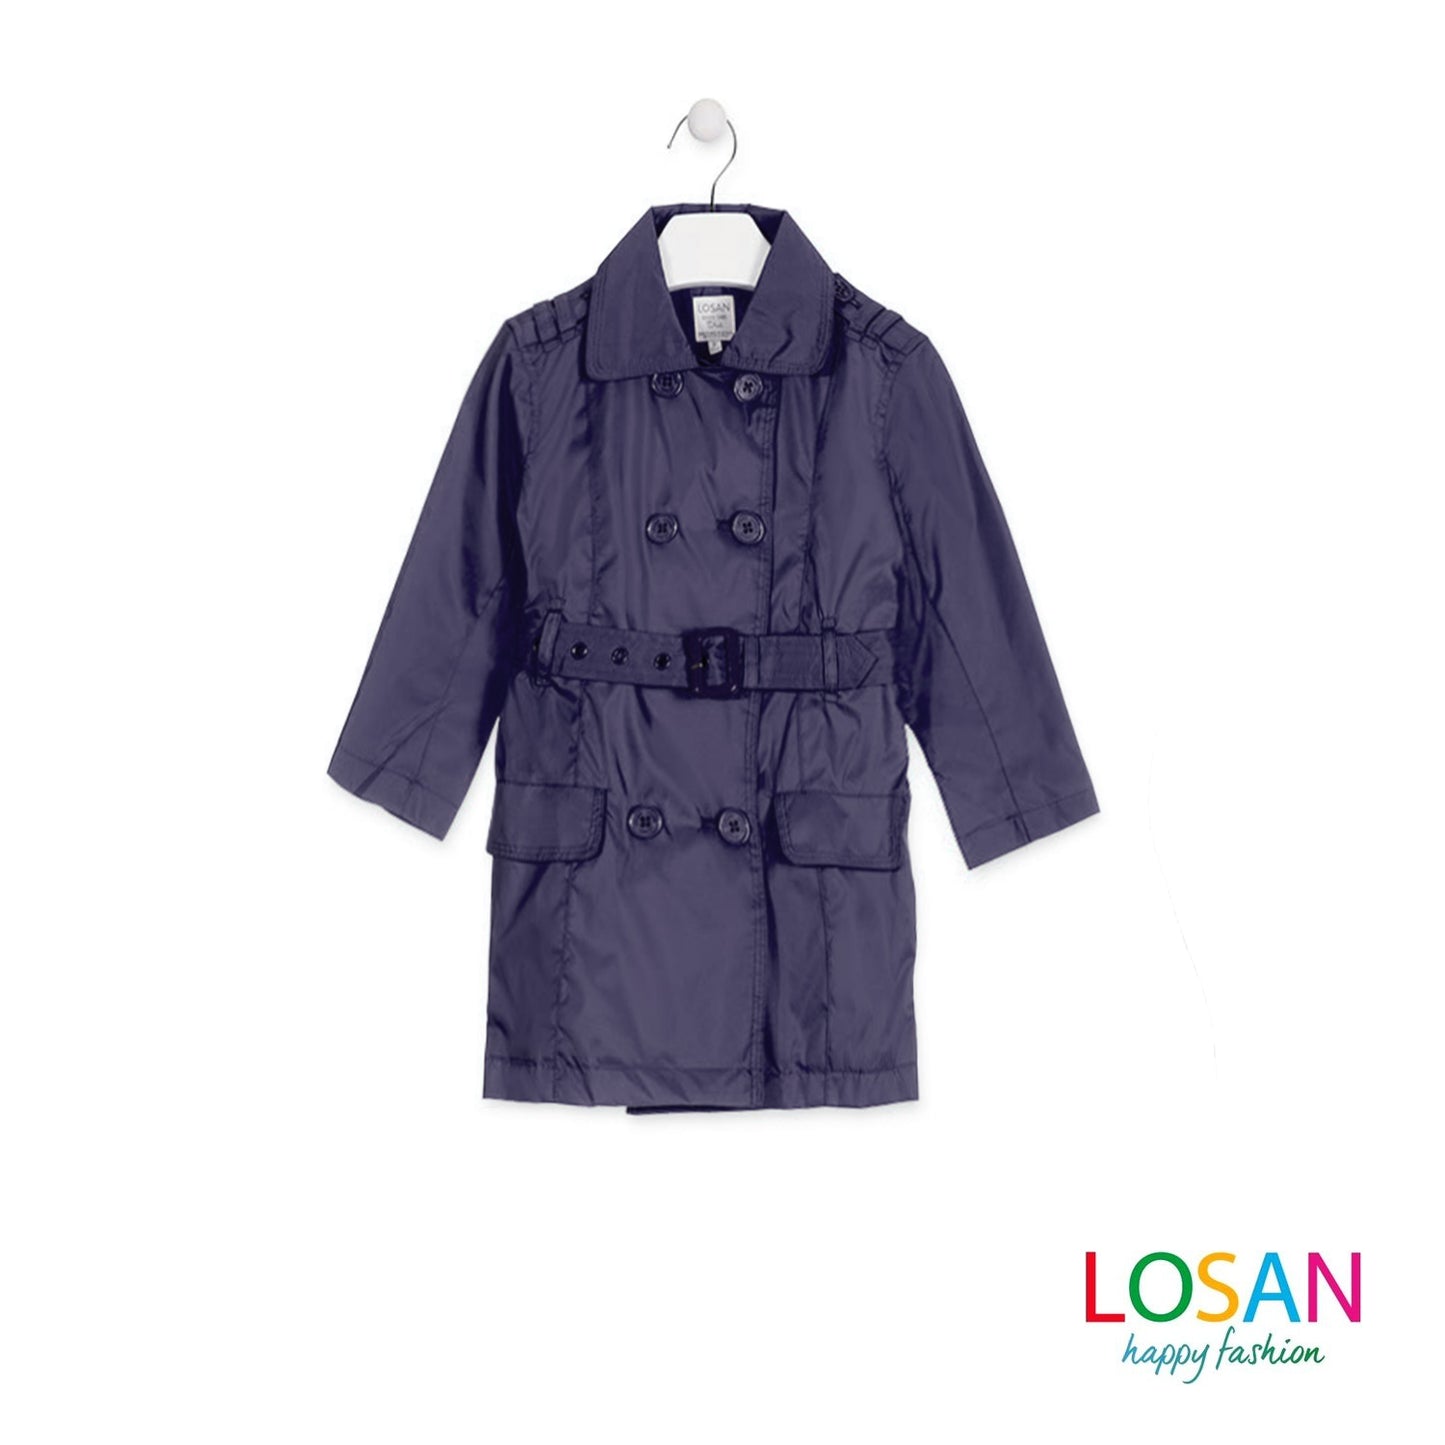 Losan - Junior belted trench coat